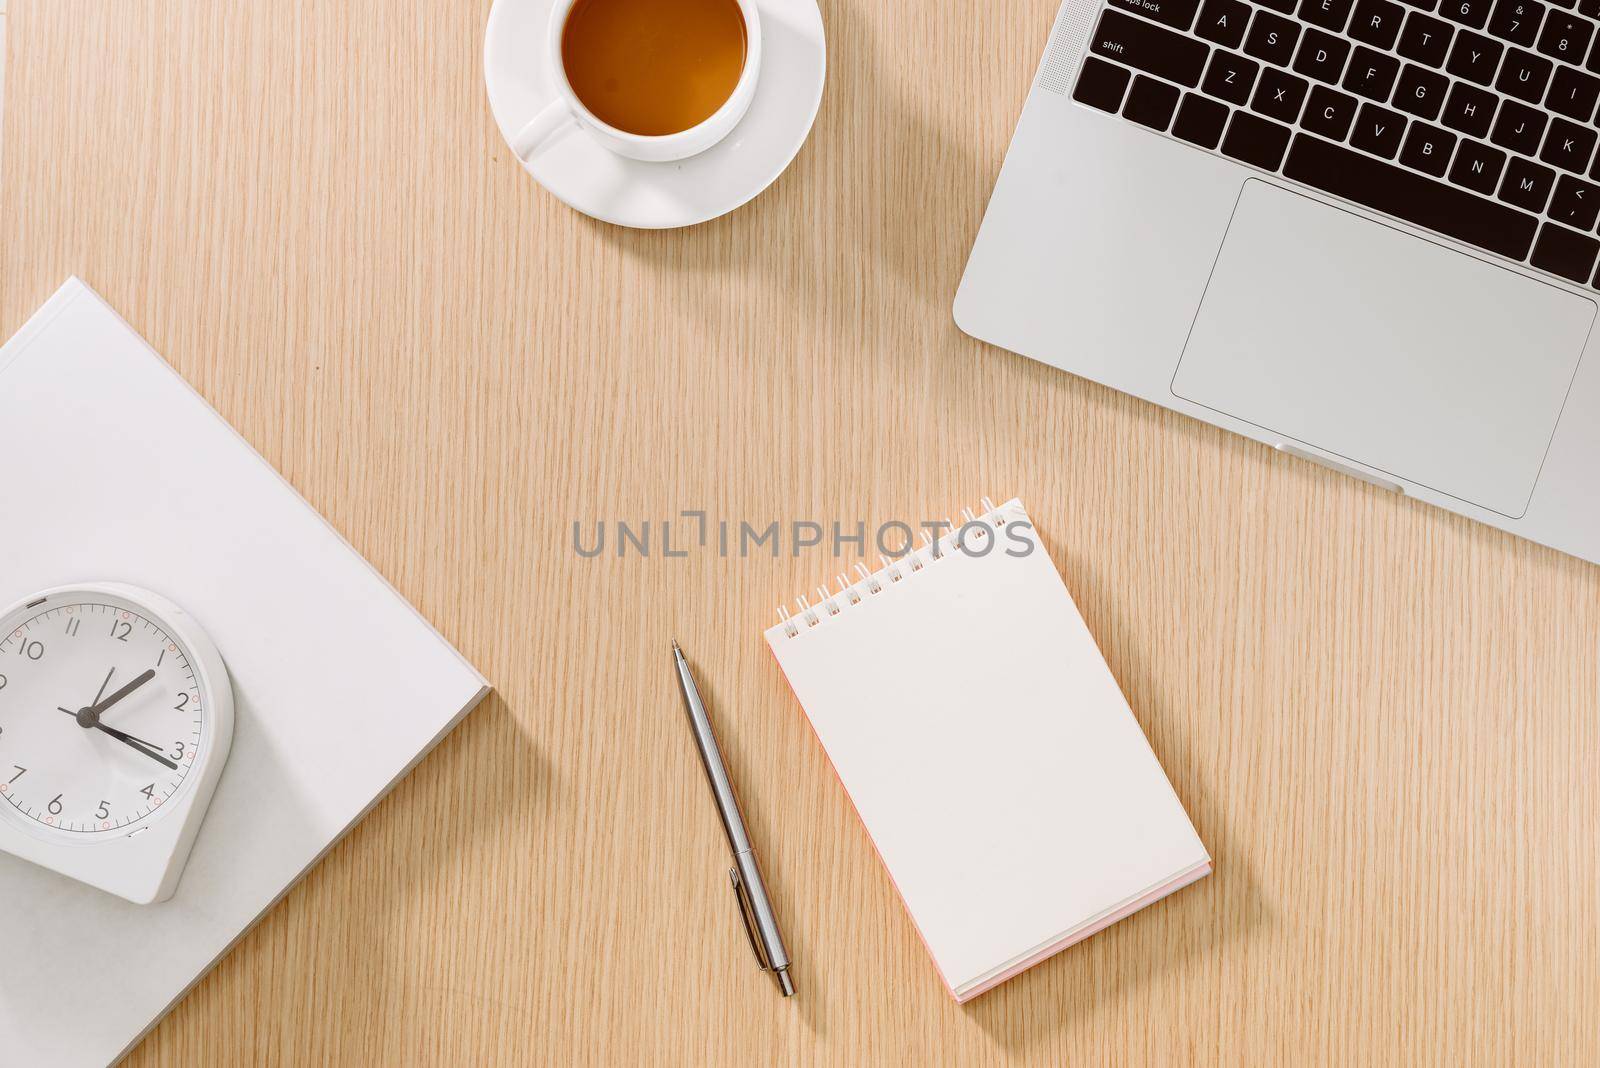 Office desk table with laptop, smart phone, cup of coffee, pen, pencil and notebook. Office supplies and gadgets on desk table. Working desk table concept.